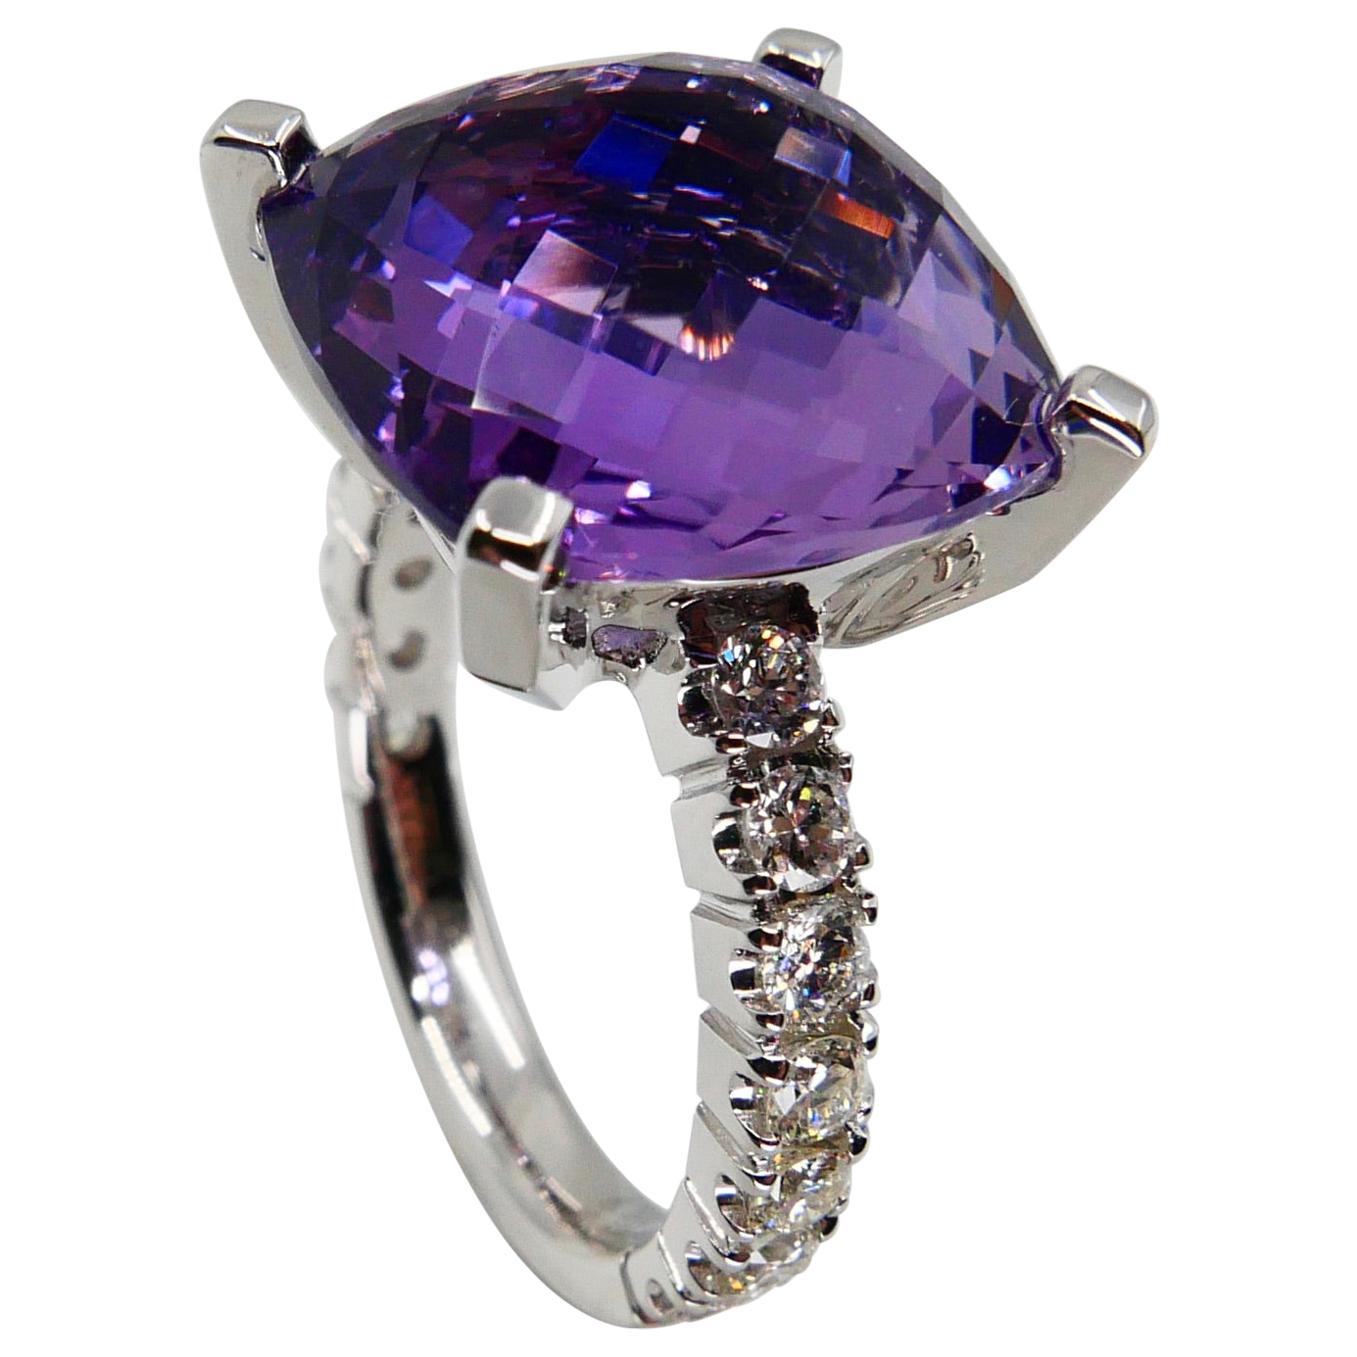 8.67 Carat Faceted Amethyst and Diamond Cocktail Ring, 18 Karat White Gold